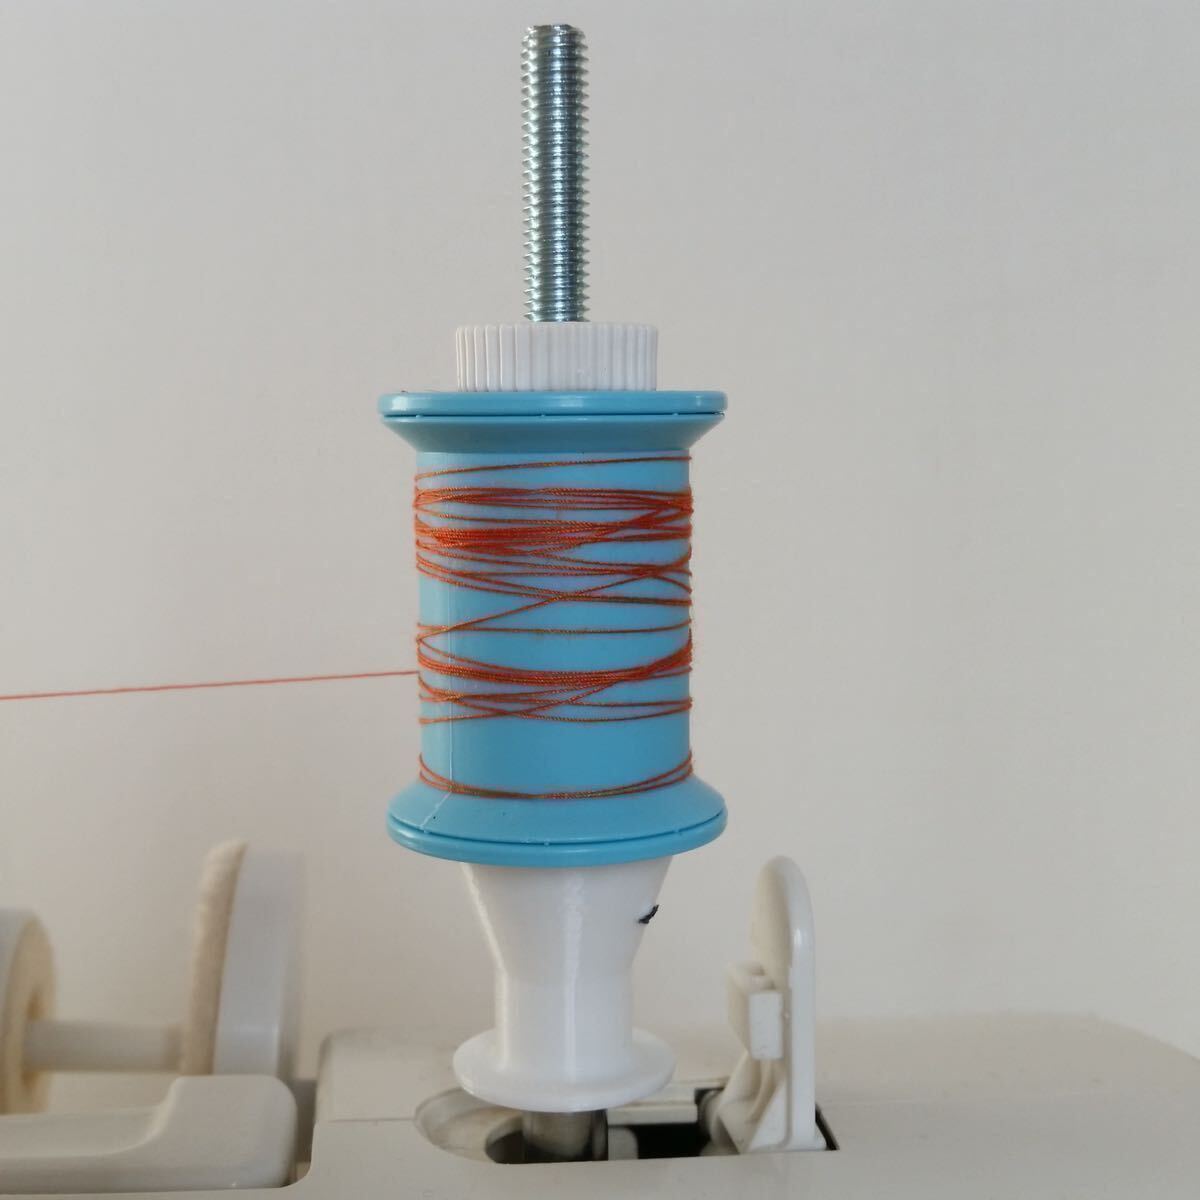  simple sewing-cotton Winder 0 thread to coil machine occupation for home use sewing machine. bobbin to coil mechanism . cover stitch sewing-cotton industry for overlock sewing machine thread . thread volume . small amount .